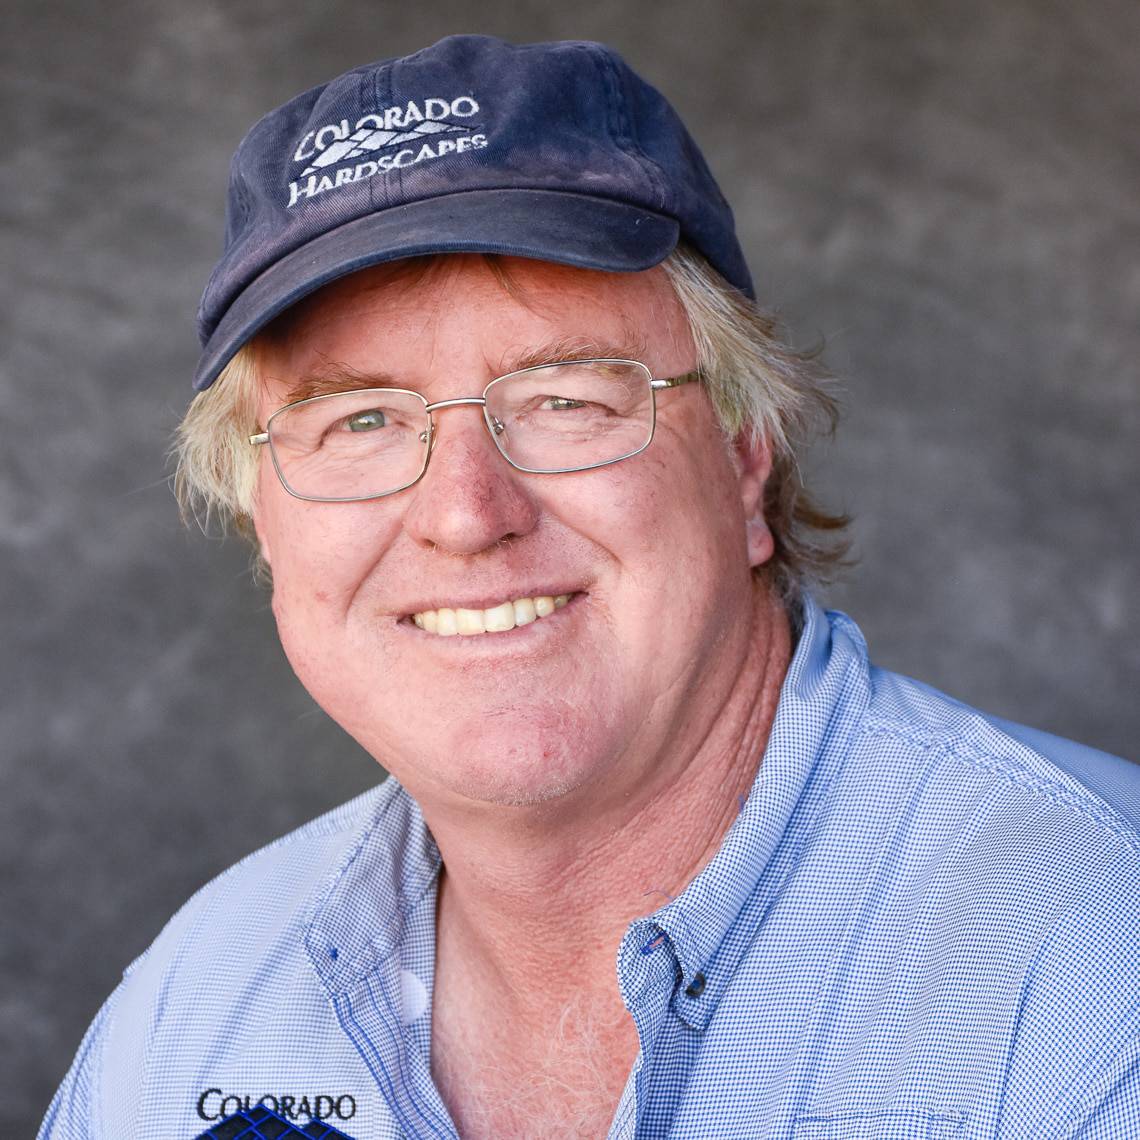 Headshot of Dan Zigterman, Colorado Hardscapes Operations Manager.